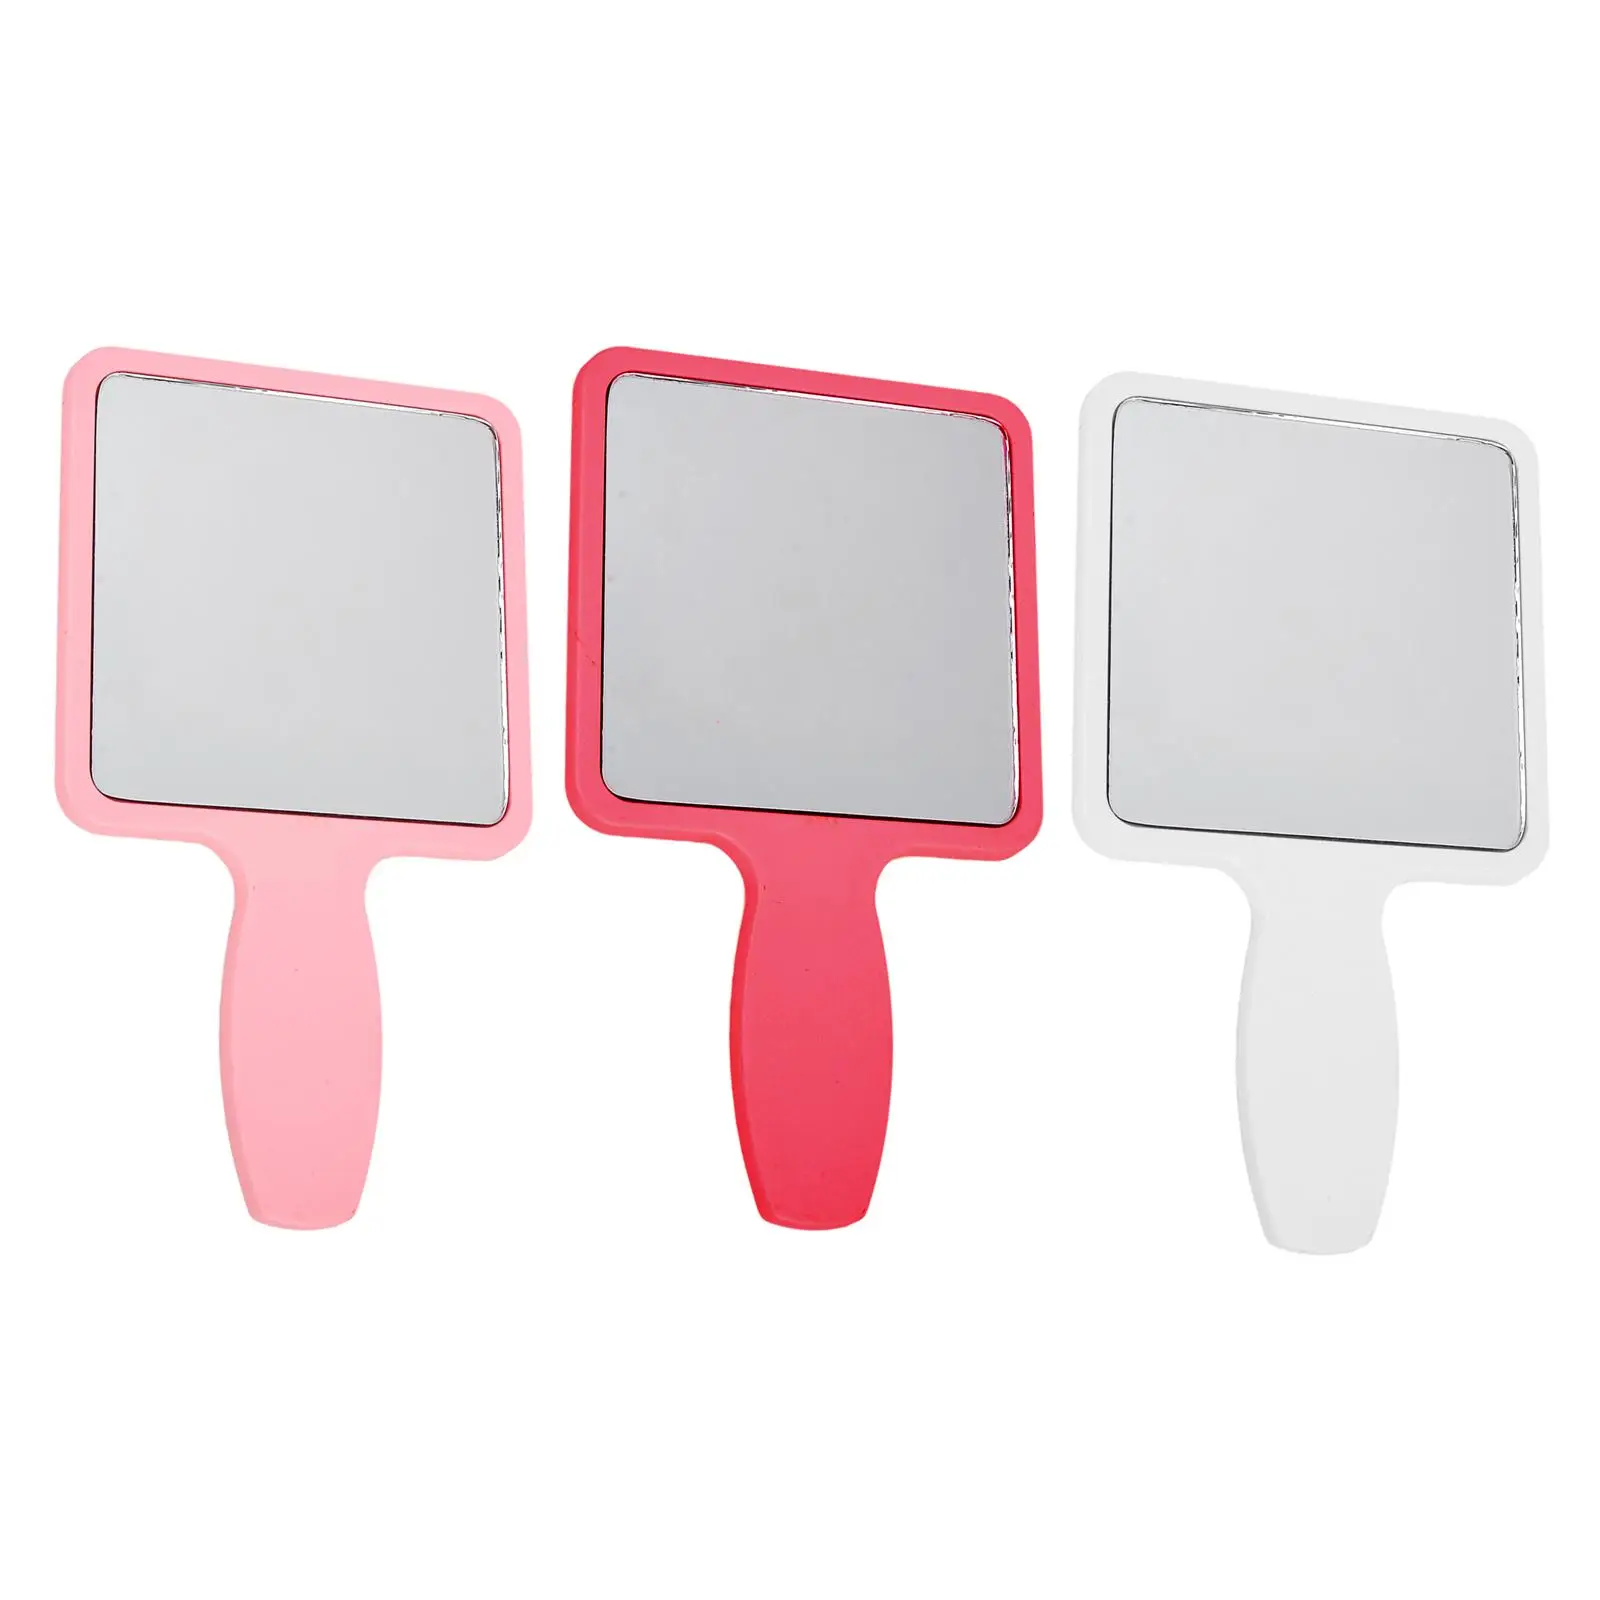 Portable Small Compact Square Shaped Mirror Handheld Mirror  Look